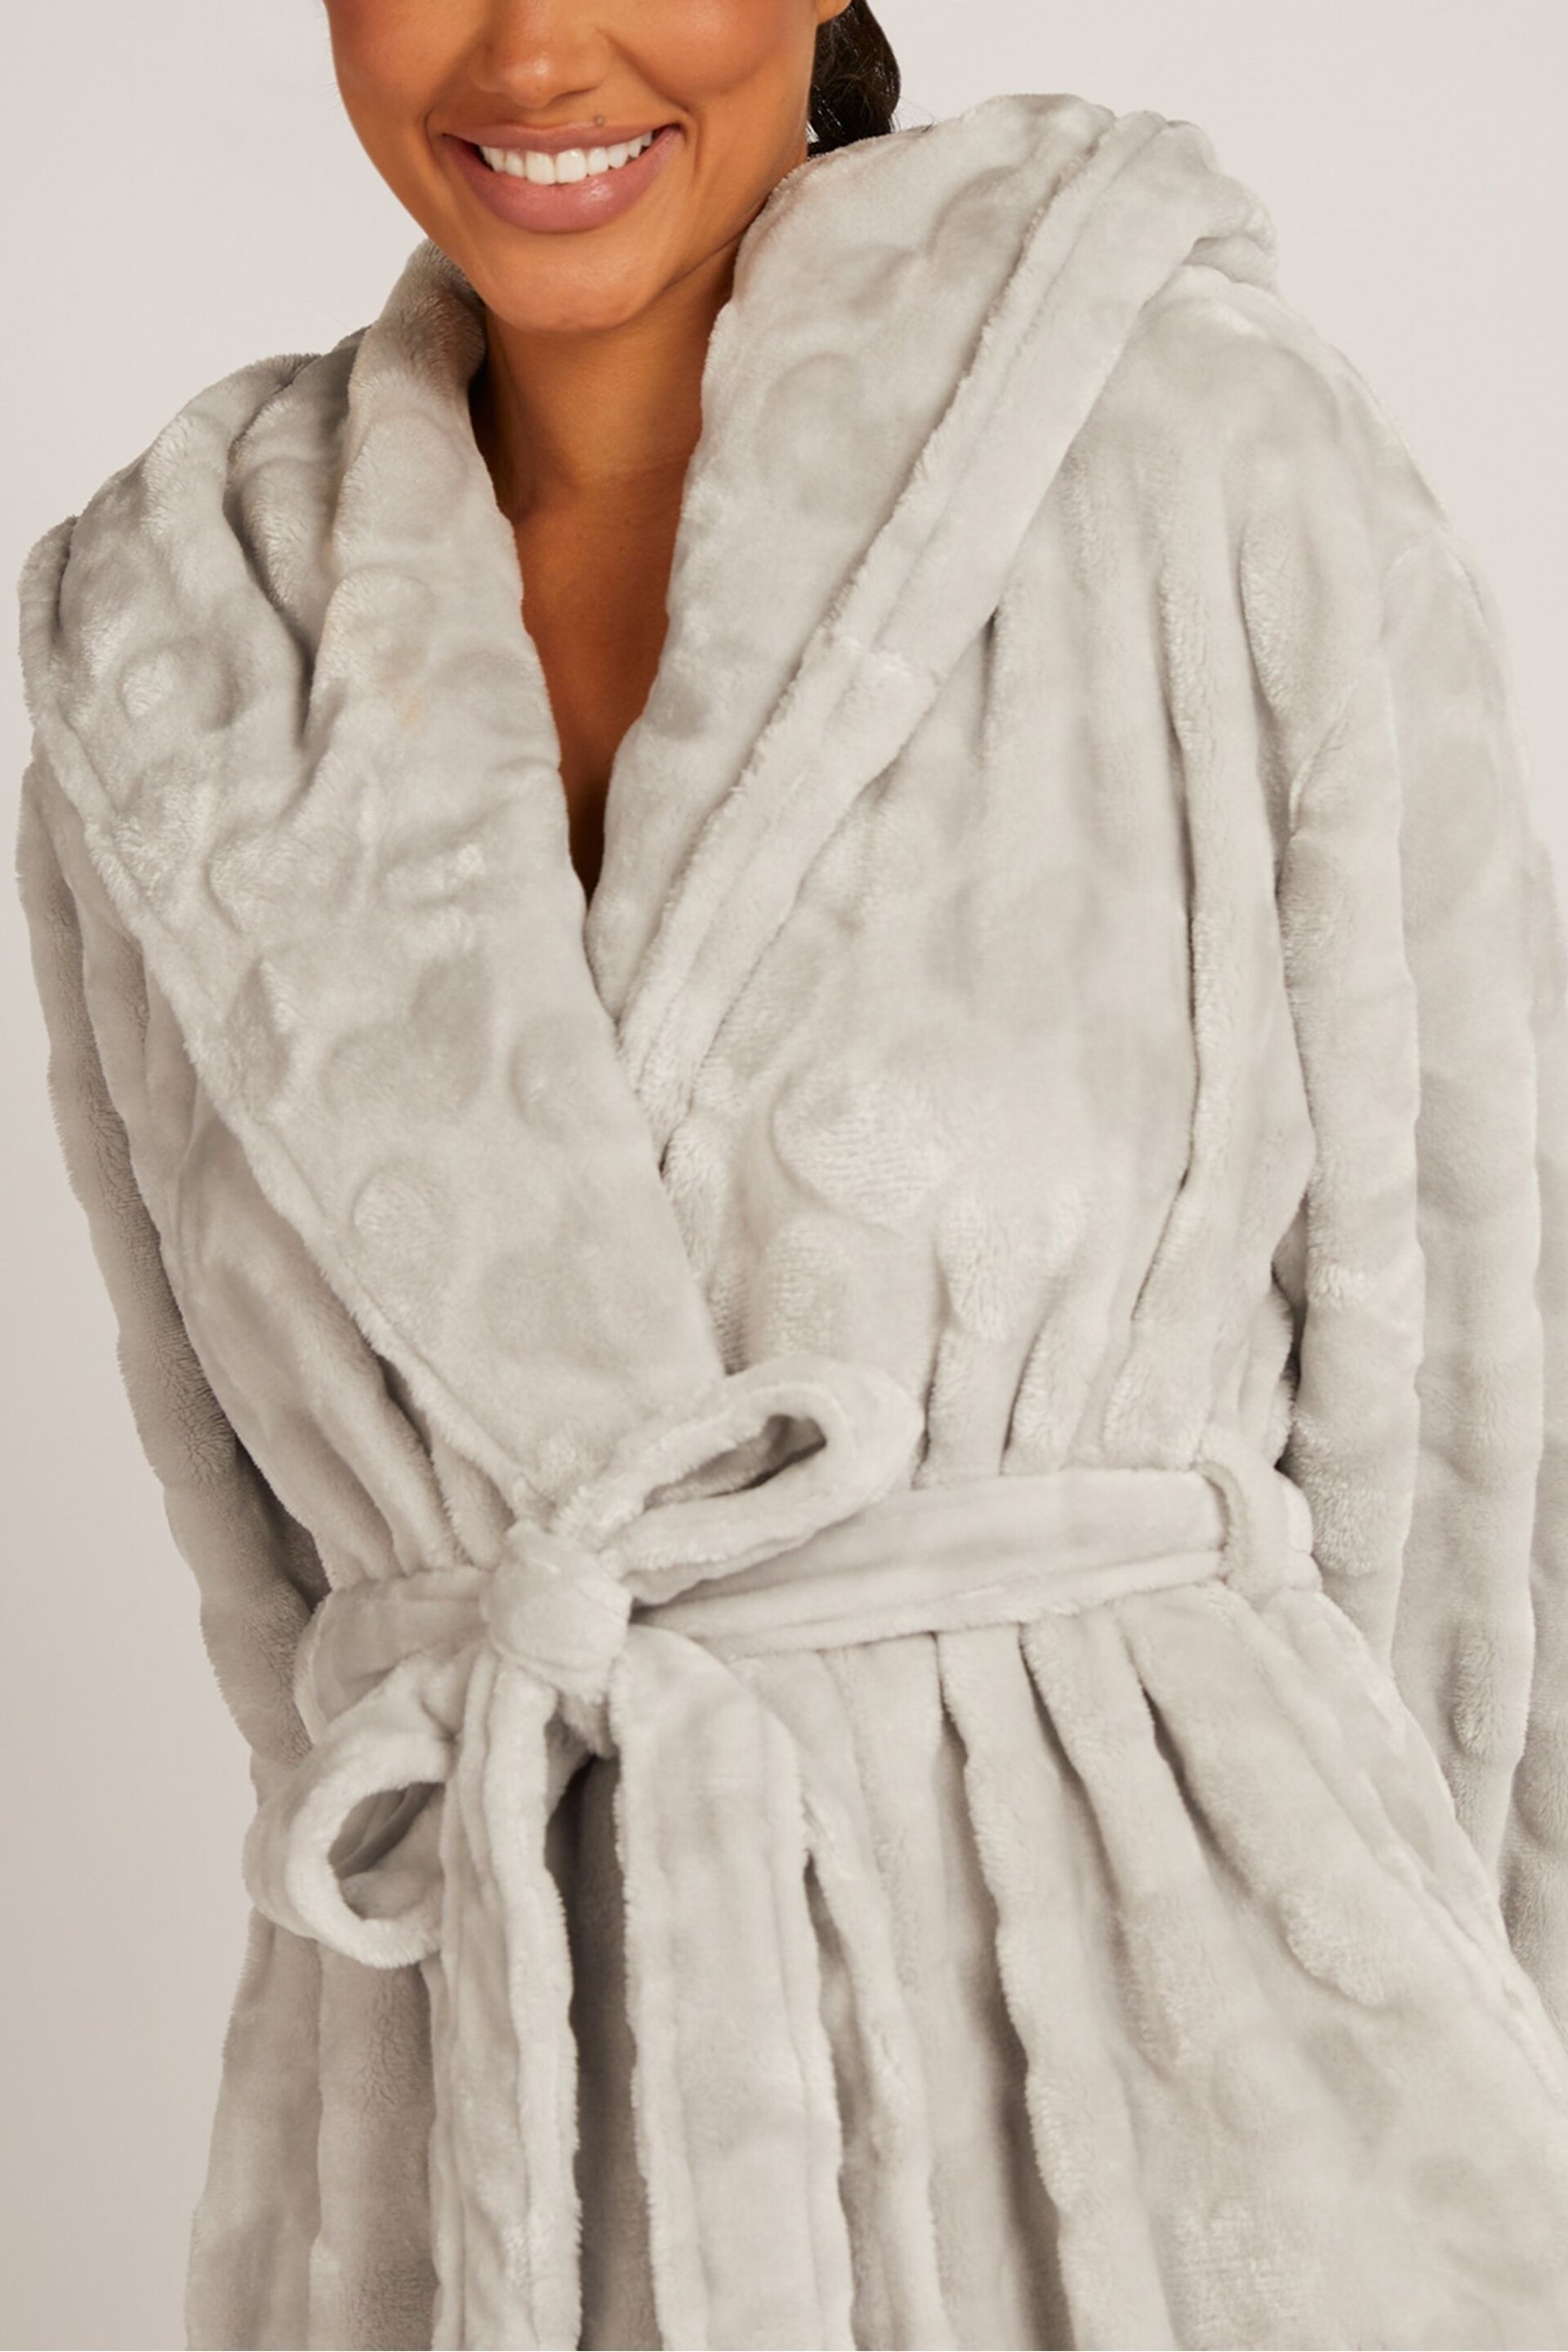 Boux Avenue Grey Heart Embossed Long Supersoft Robe Dressing Gown - Image 4 of 4